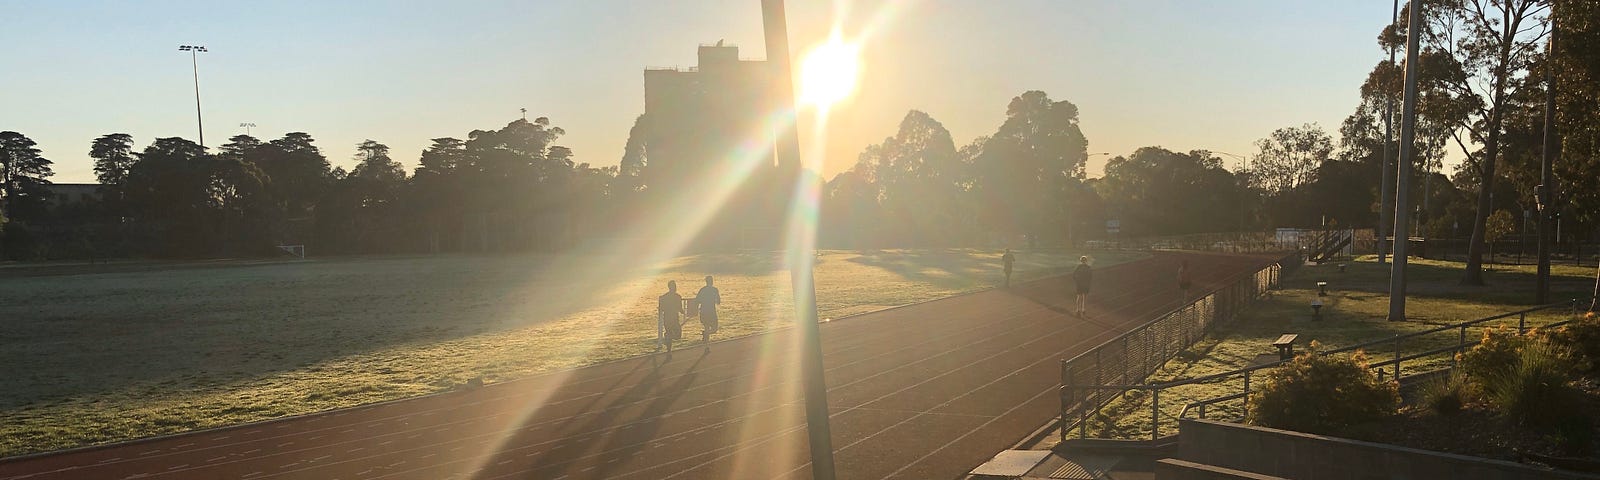 Thursday morning track, a new day dawns.